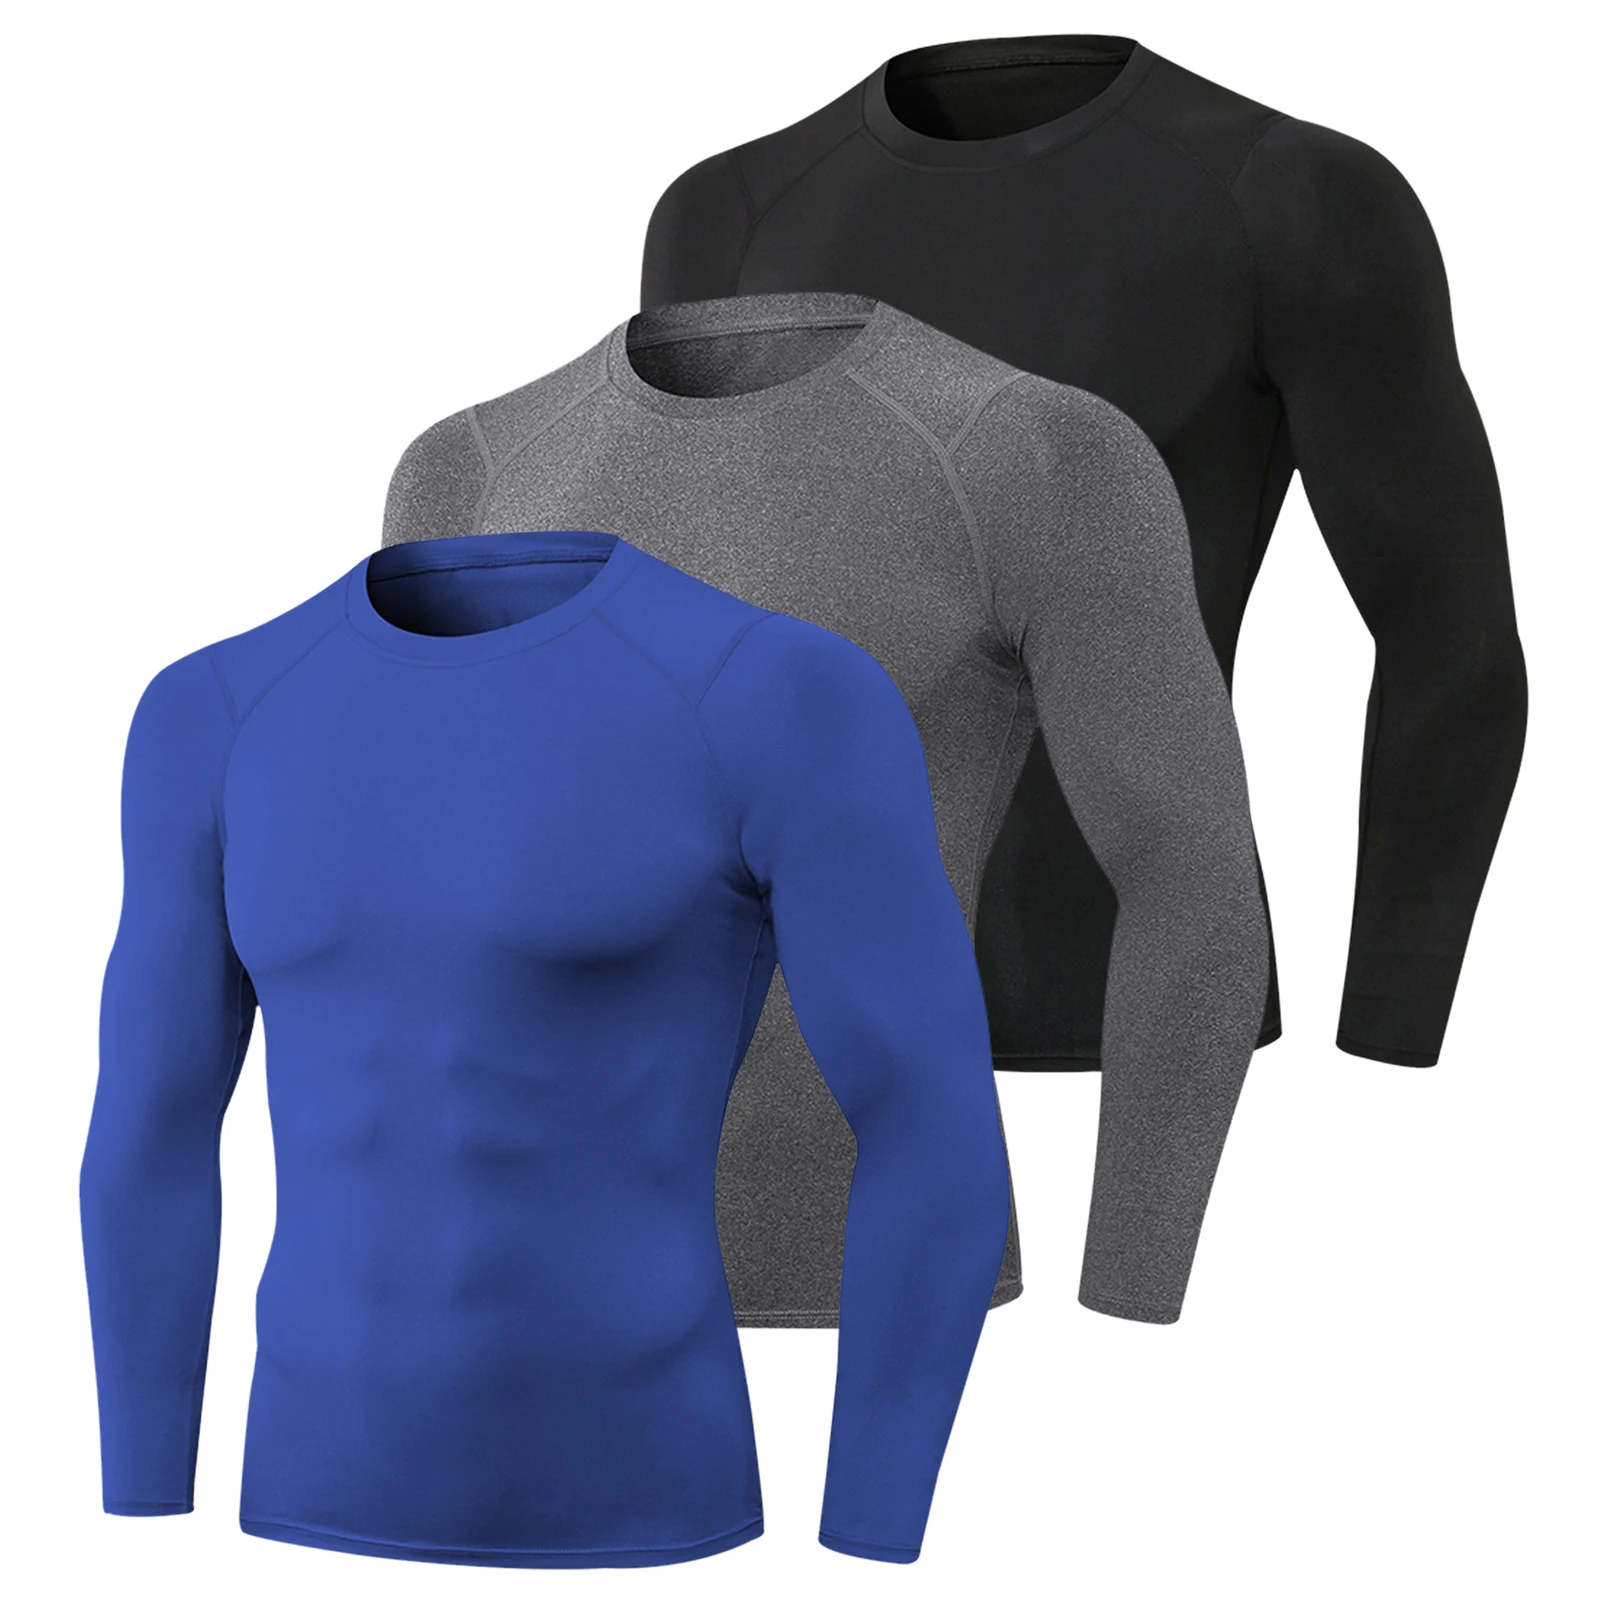 

3pcs Men's Athletic Long Sleeve Compre ssion Shirts Quick Dry Workout T-Shirt Running Tops